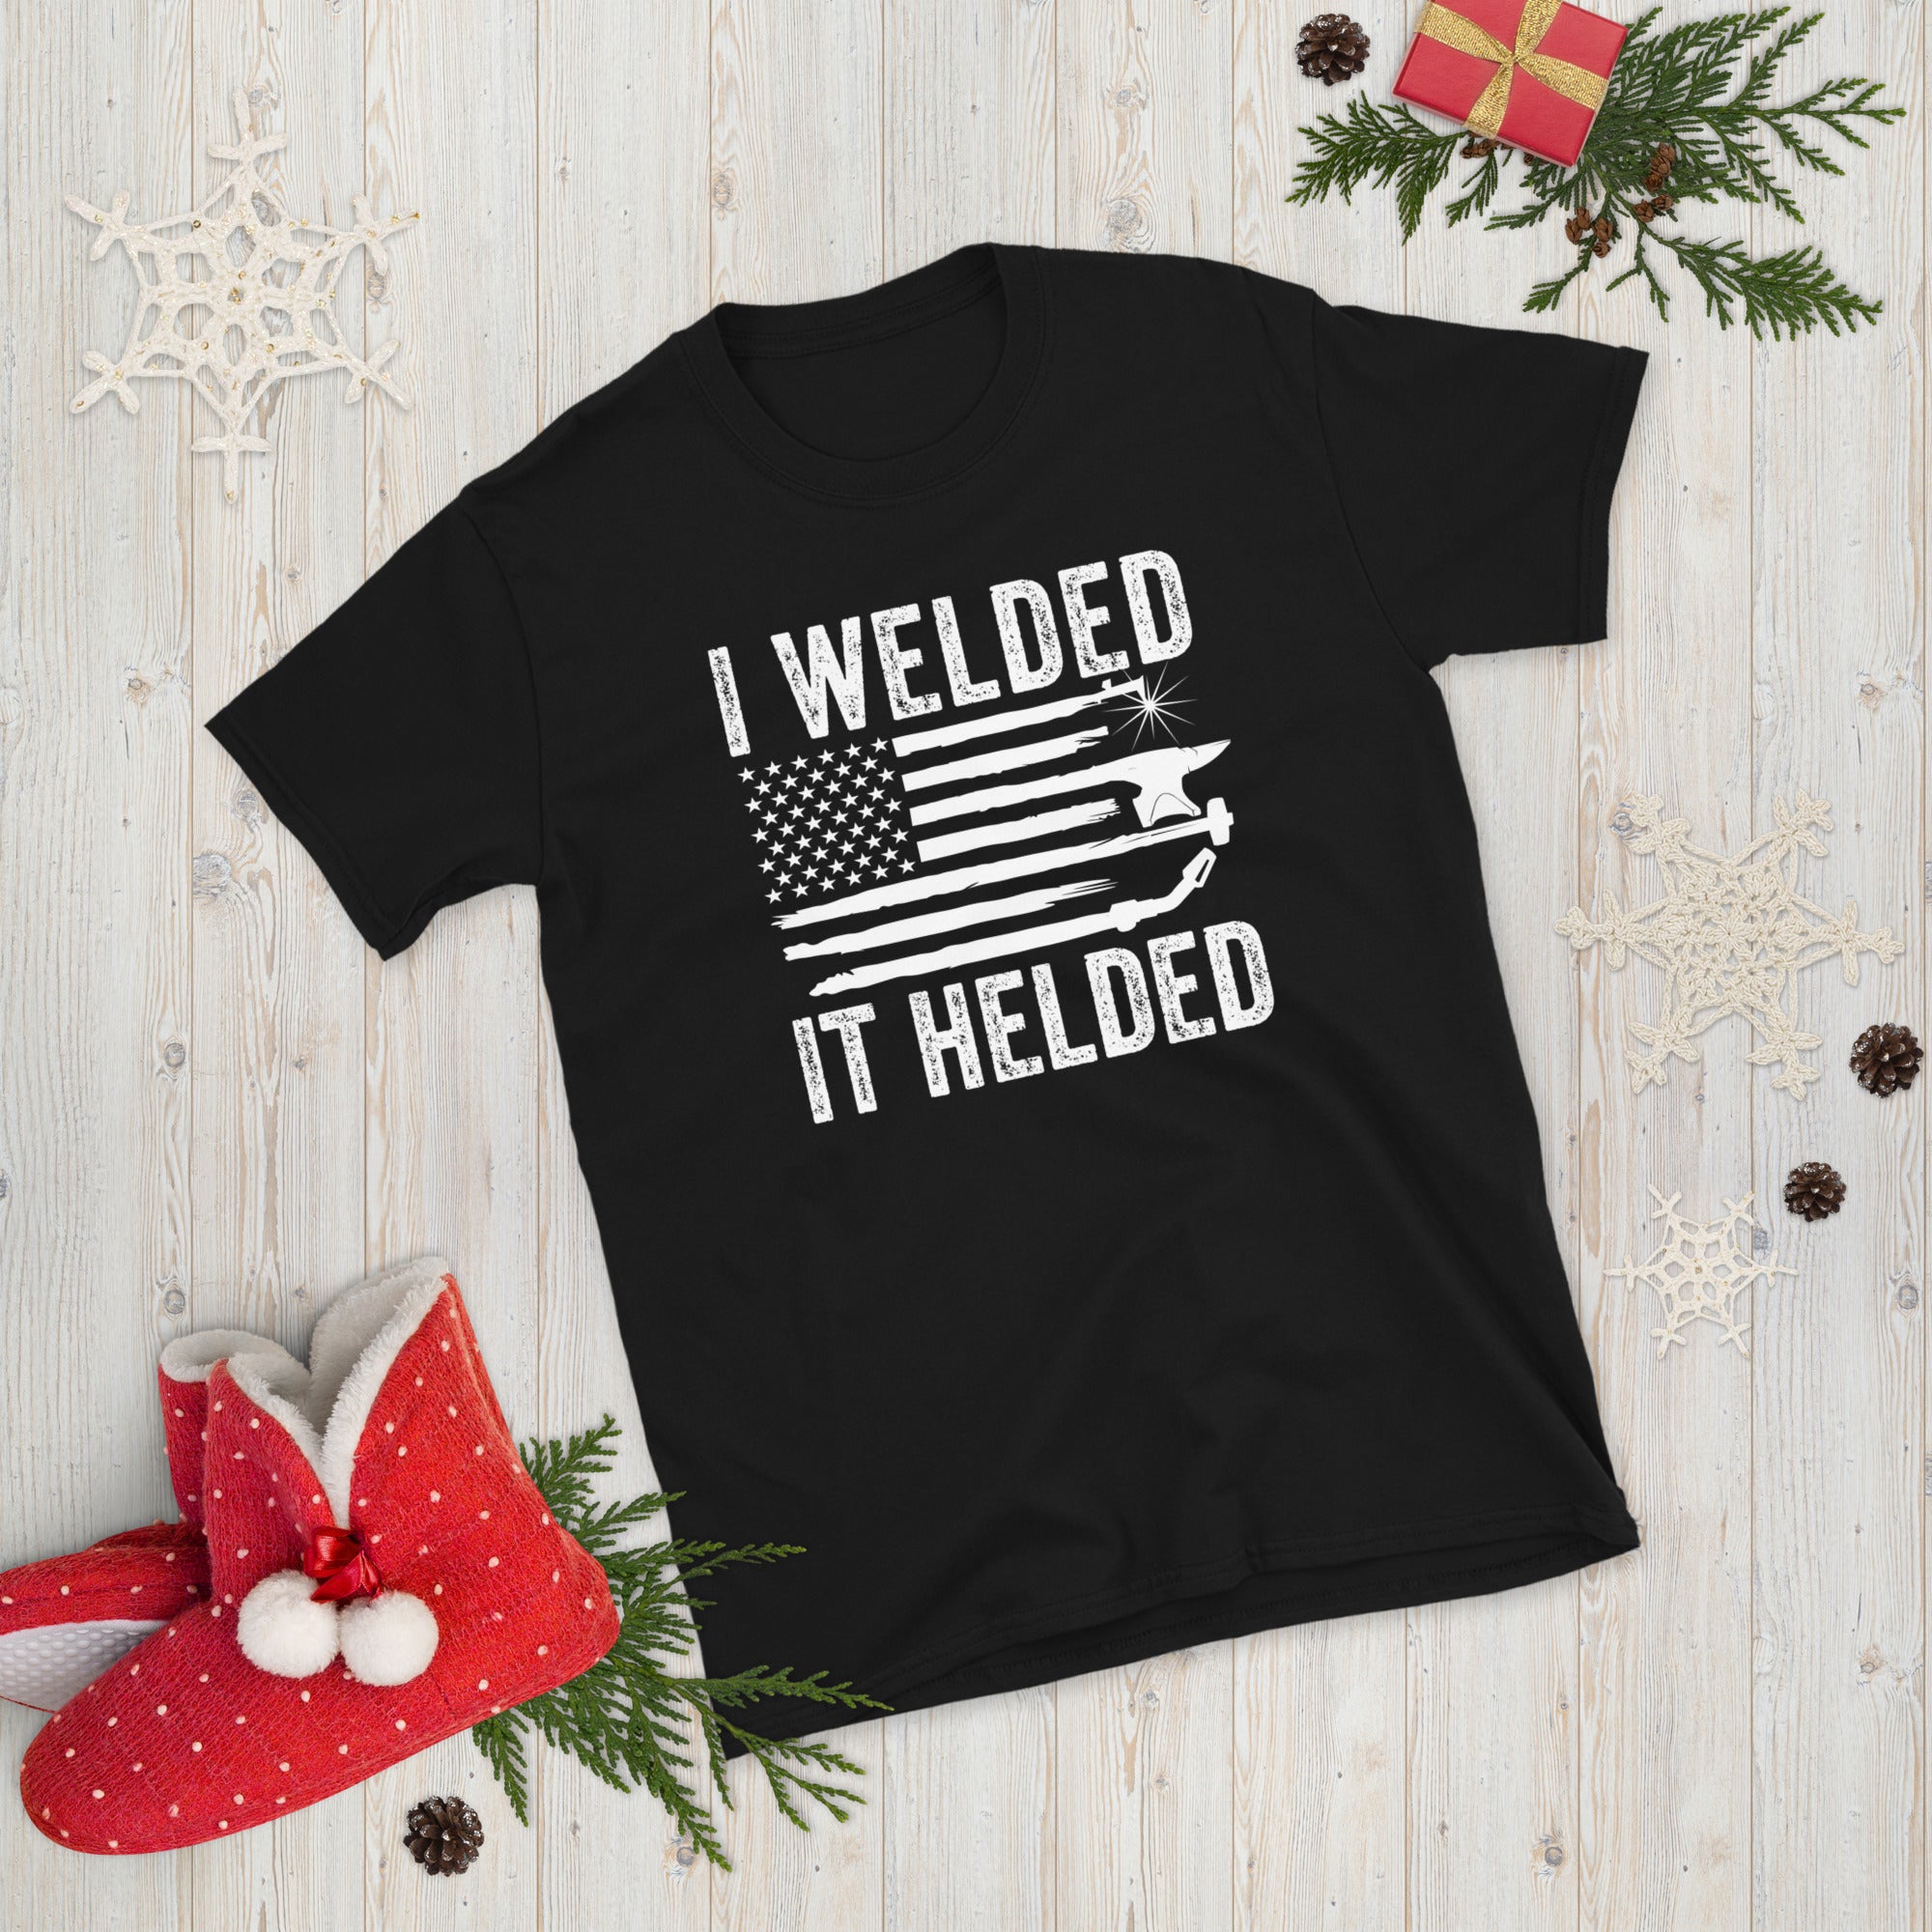 Welder Shirt, Welder Gift, Welding Gift, Welding Shirt, Welder TShirt, Metal Worker Gift, Welder American Flag USA Shirt, I Welded It Helded - Madeinsea©